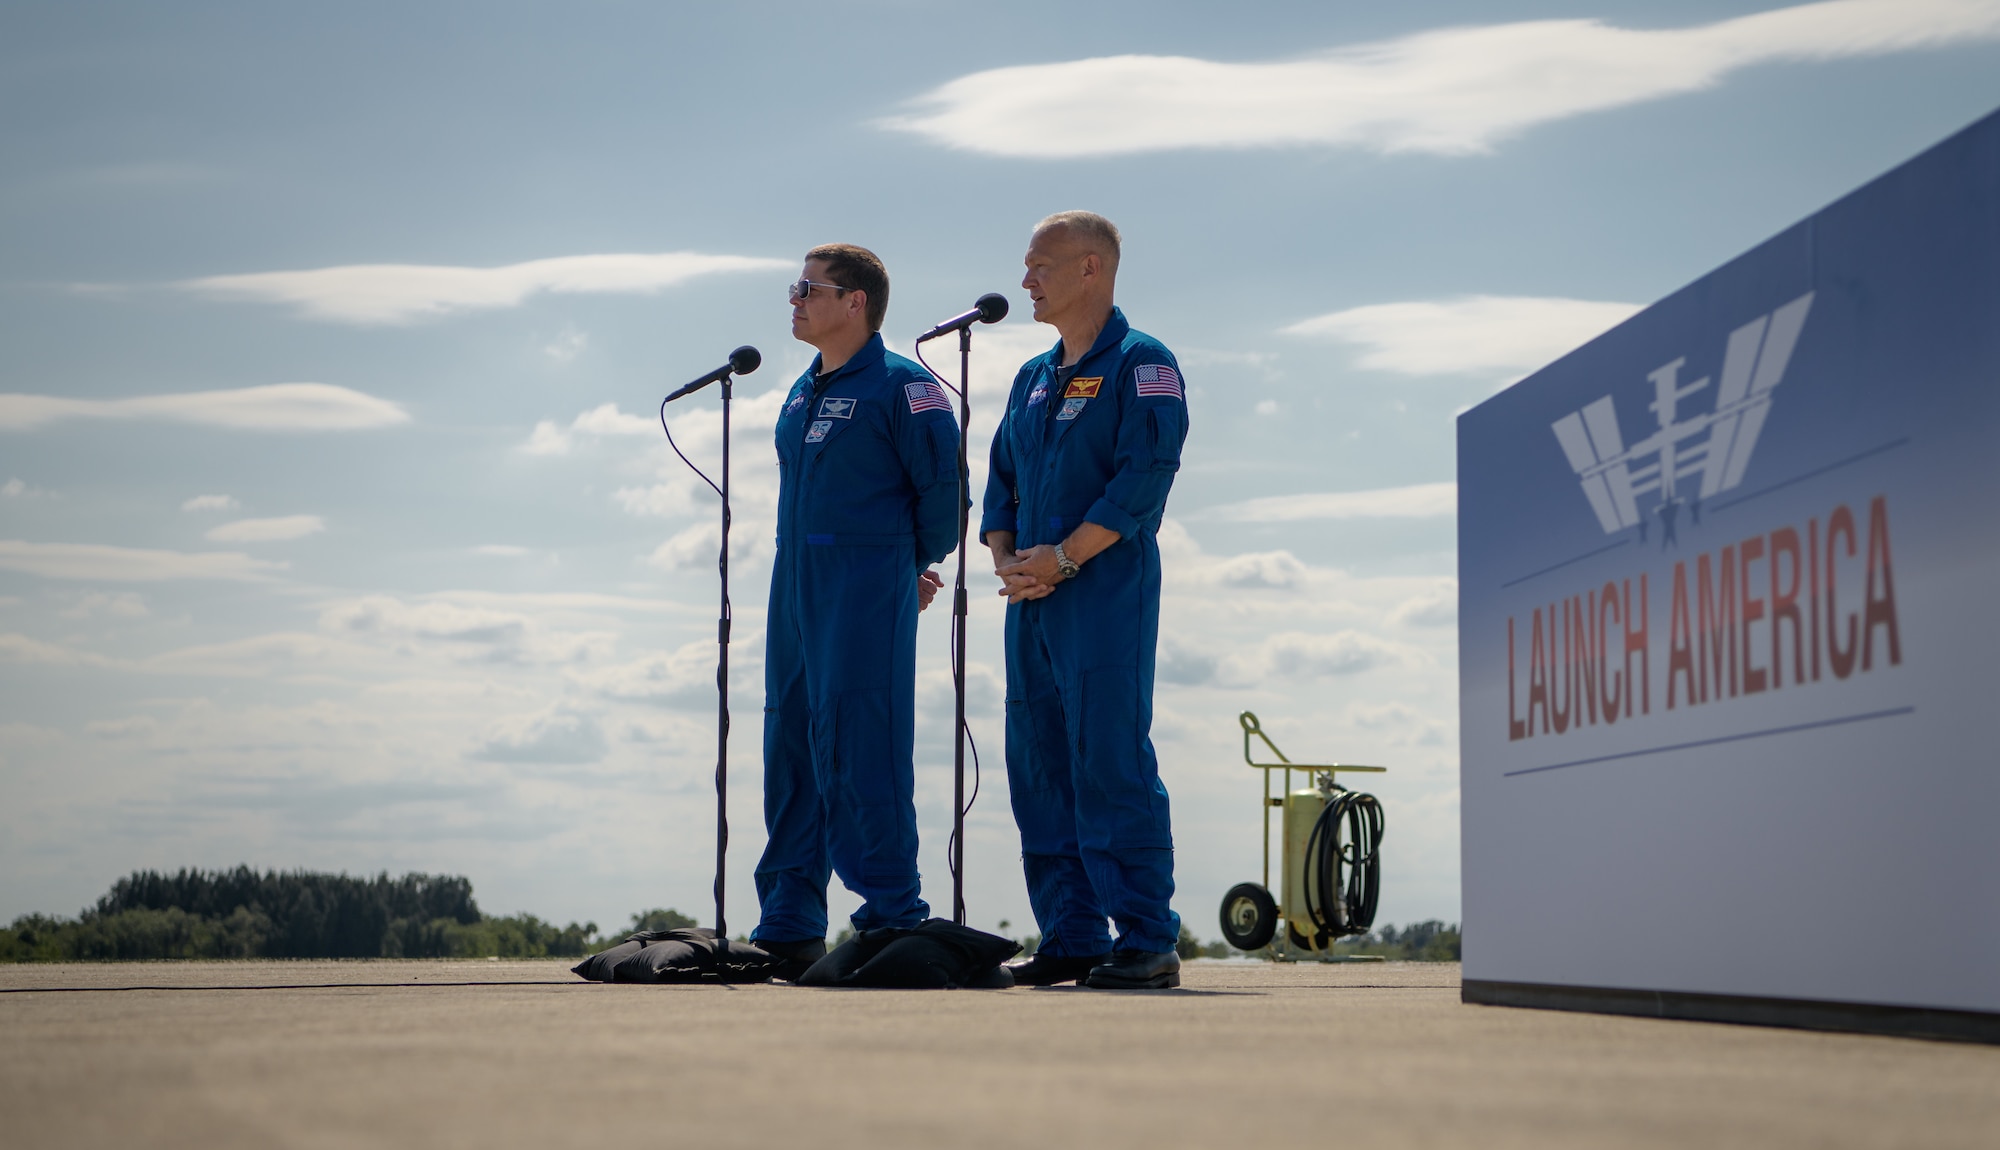 NASA astronauts Robert Behnken, left, and Douglas Hurley speak to members of the media after arriving at the Launch and Landing Facility at NASA’s Kennedy Space Center ahead of SpaceX’s Demo-2 mission, Wednesday, May 20, 2020, in Florida. NASA’s SpaceX Demo-2 mission is the first launch with astronauts of the SpaceX Crew Dragon spacecraft and Falcon 9 rocket to the International Space Station as part of the agency’s Commercial Crew Program. The flight test will serve as an end-to-end demonstration of SpaceX’s crew transportation system. Behnken and Hurley are scheduled to launch at 4:33 p.m. EDT on Wednesday, May 27, from Launch Complex 39A at the Kennedy Space Center. A new era of human spaceflight is set to begin as American astronauts once again launch on an American rocket from American soil to low-Earth orbit for the first time since the conclusion of the Space Shuttle Program in 2011.  Photo Credit: (NASA/Bill Ingalls)